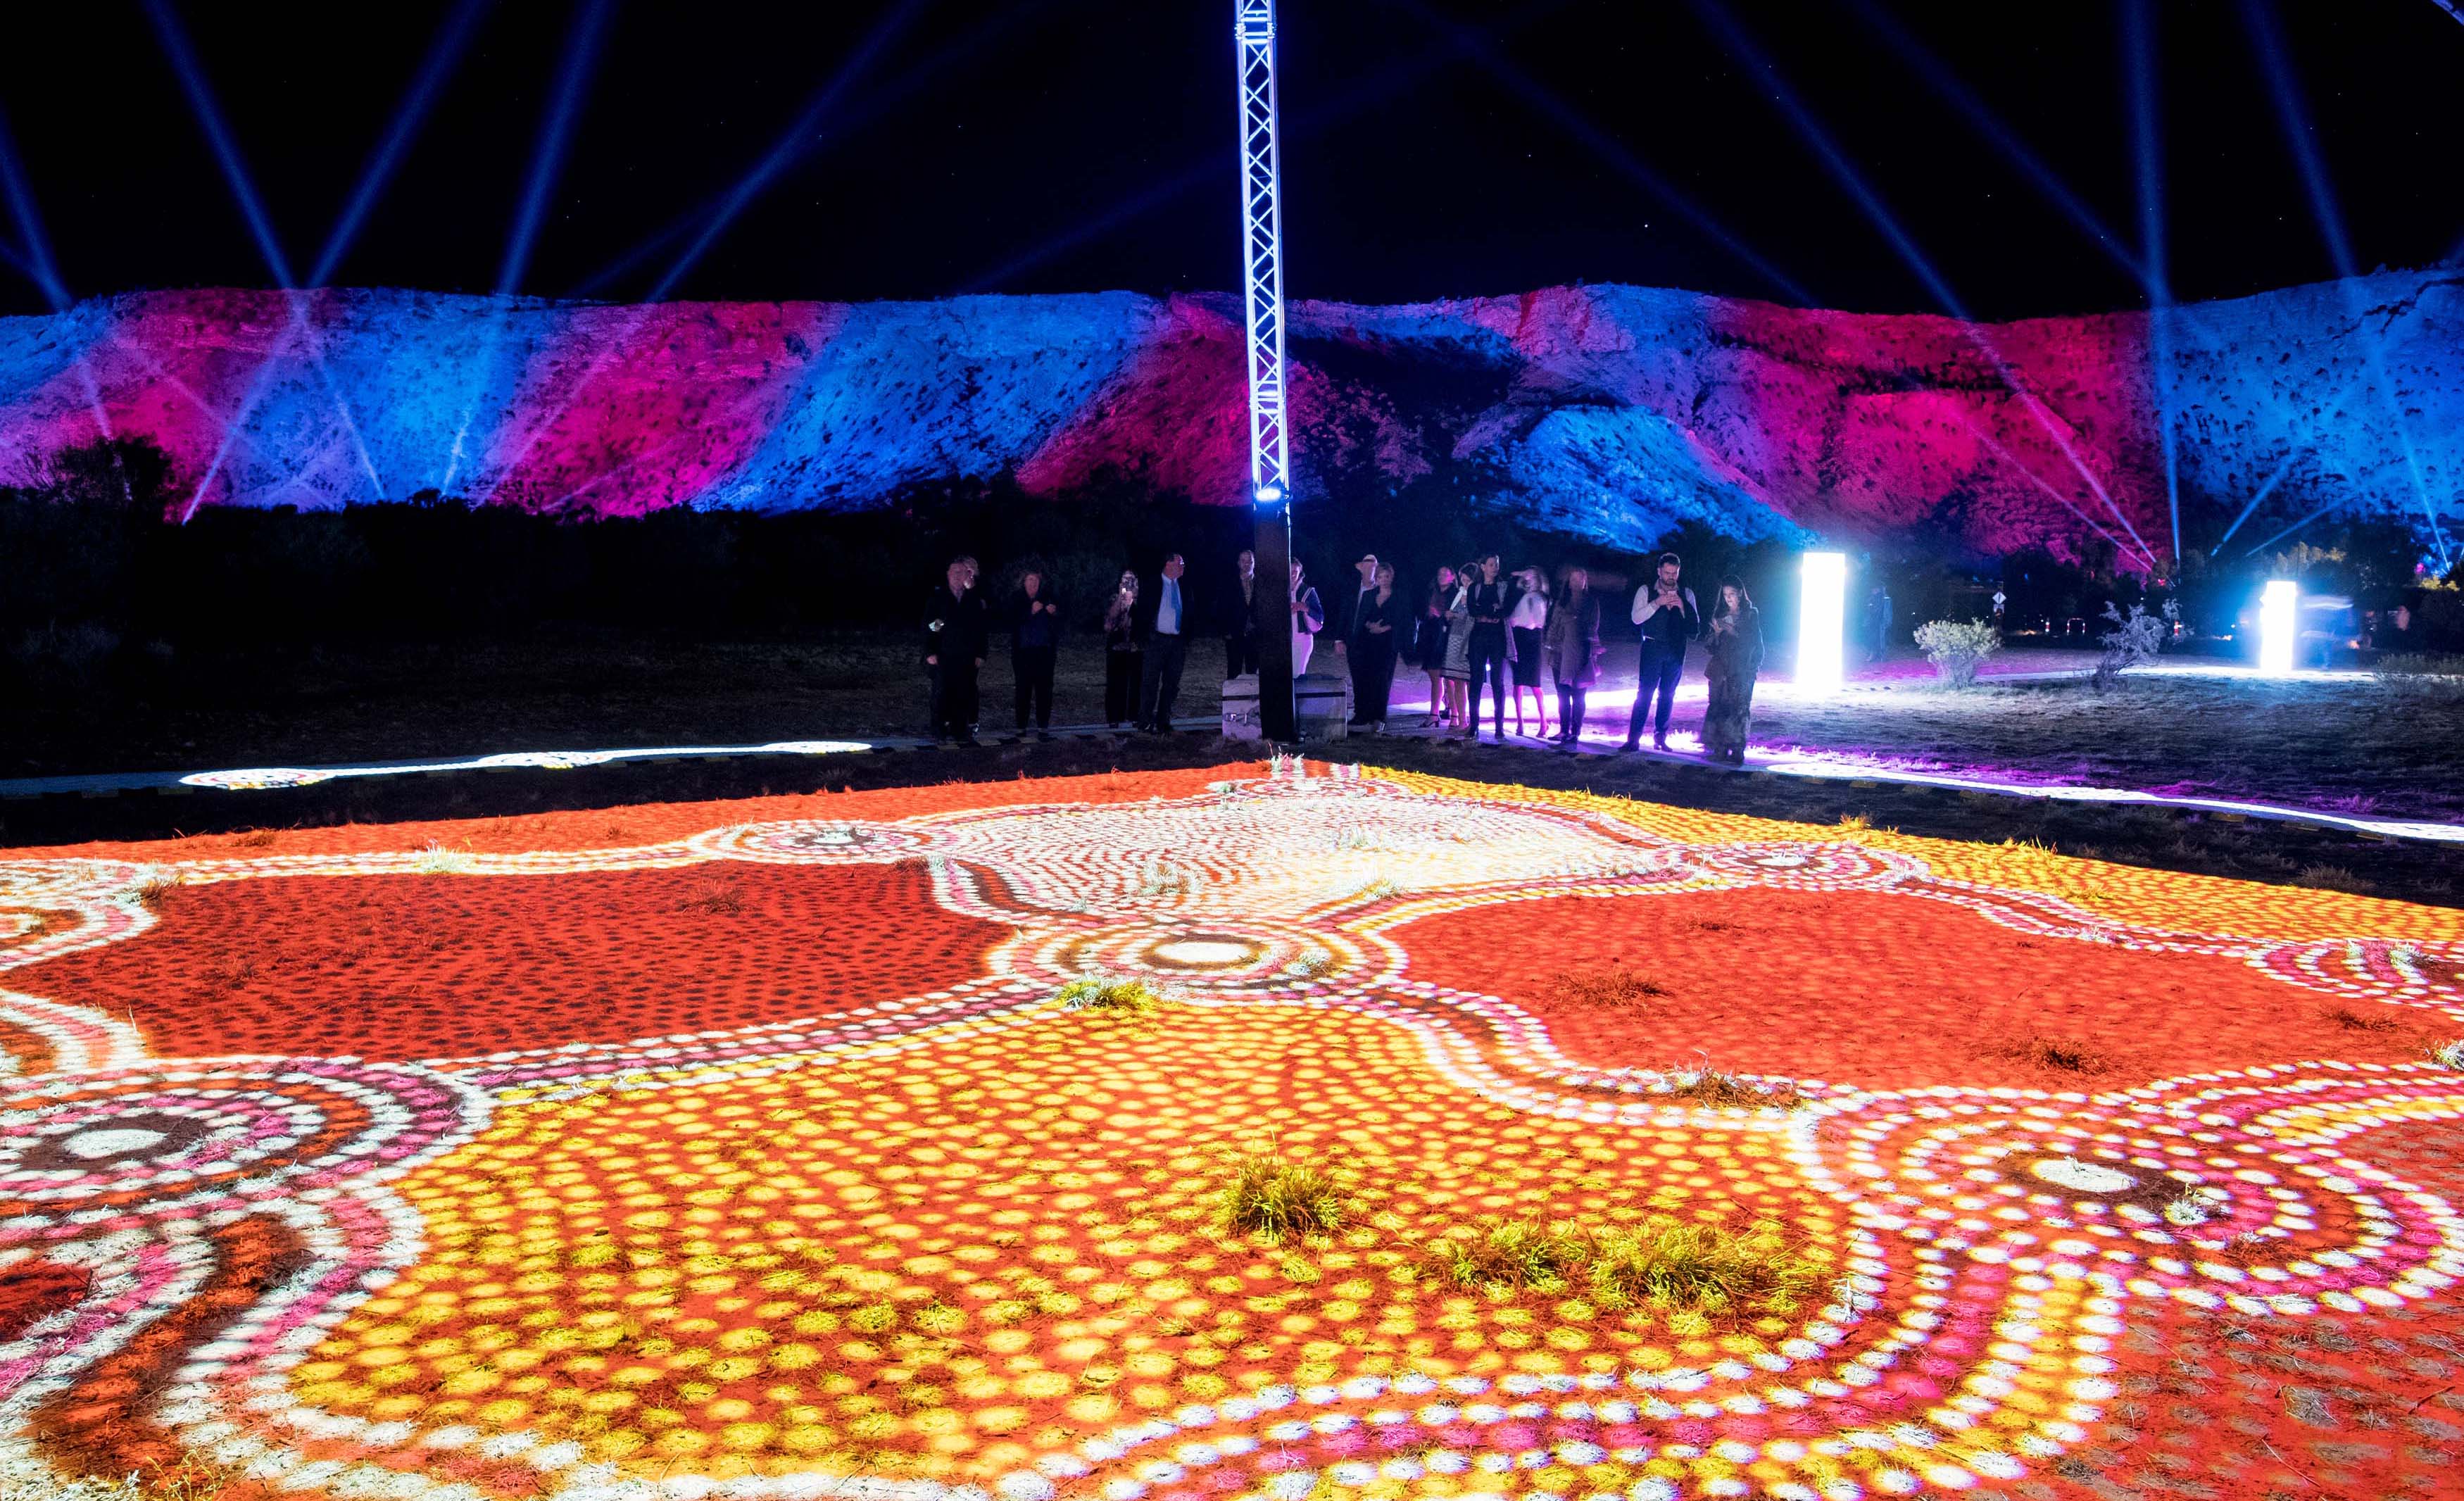 Australia's Biggest Light Installation Has Been Unveiled in Alice Springs